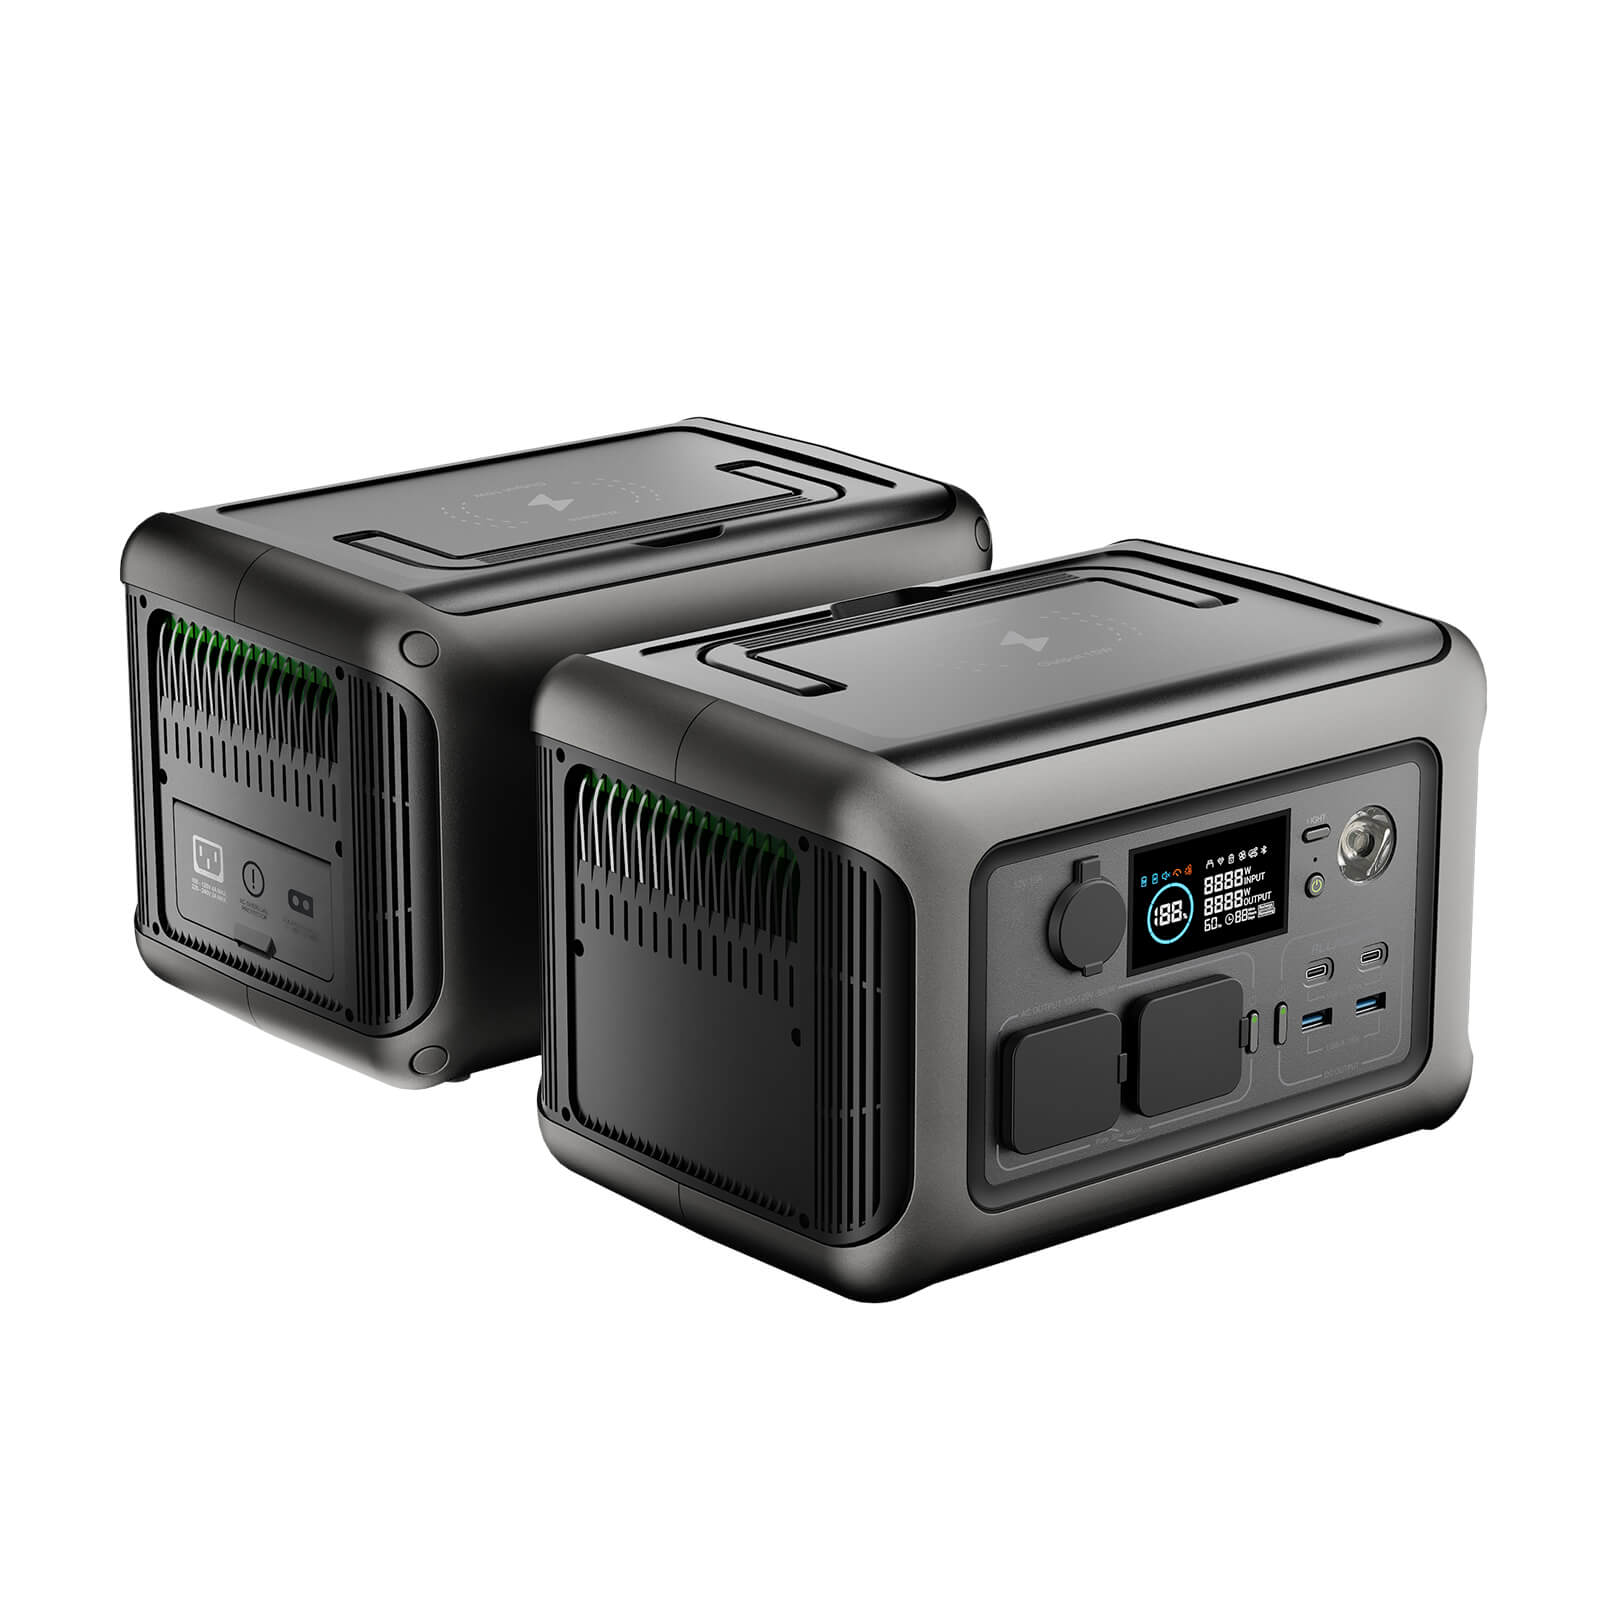 [Upgraded Version] ALLPOWERS R600 Super-Quiet Portable Power Station, 299Wh  600W LiFePO4 Battery Backup with UPS Function, 400W Max Input, MPPT Solar